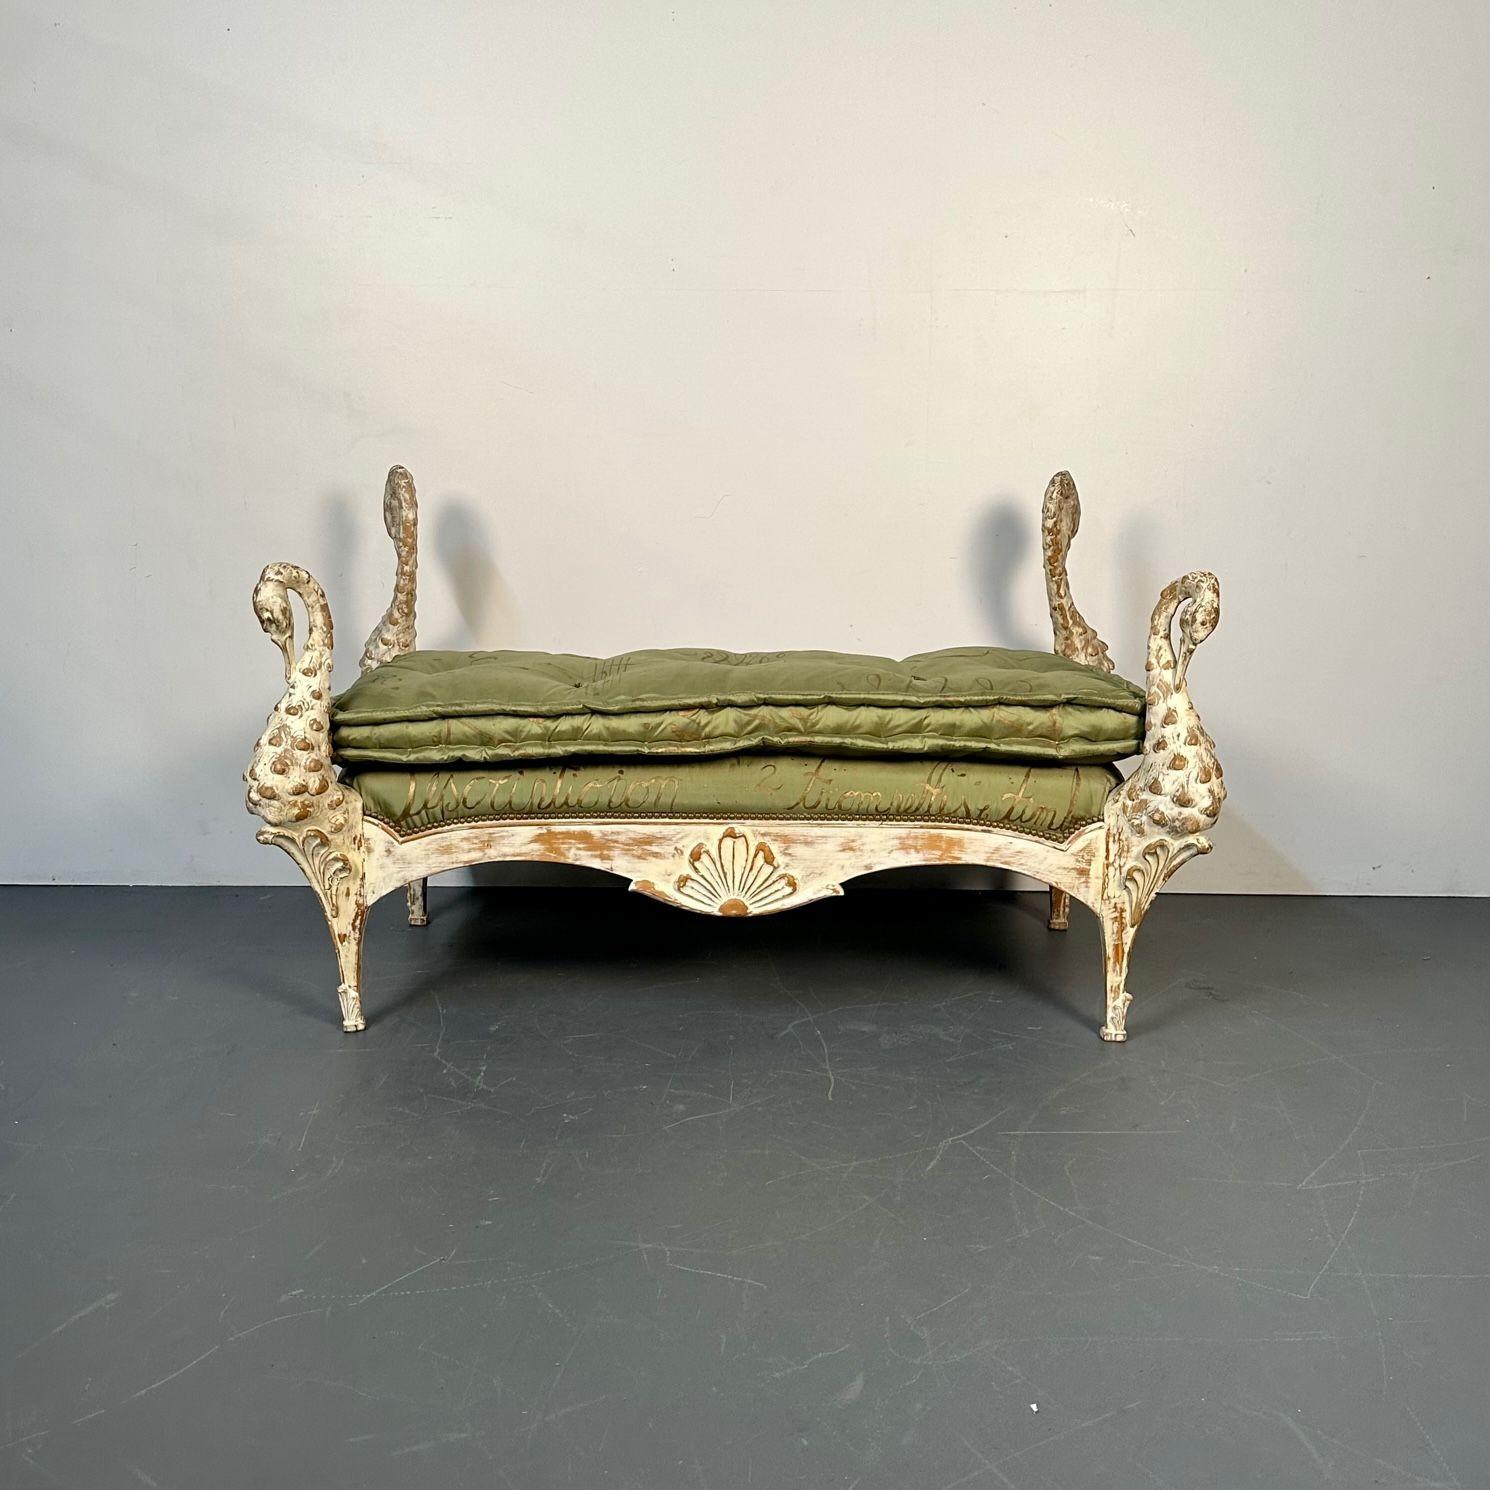 20th Century Maison Jansen Hollywood Regency Swan Bench / Daybed, Hand Carved, Distressed For Sale